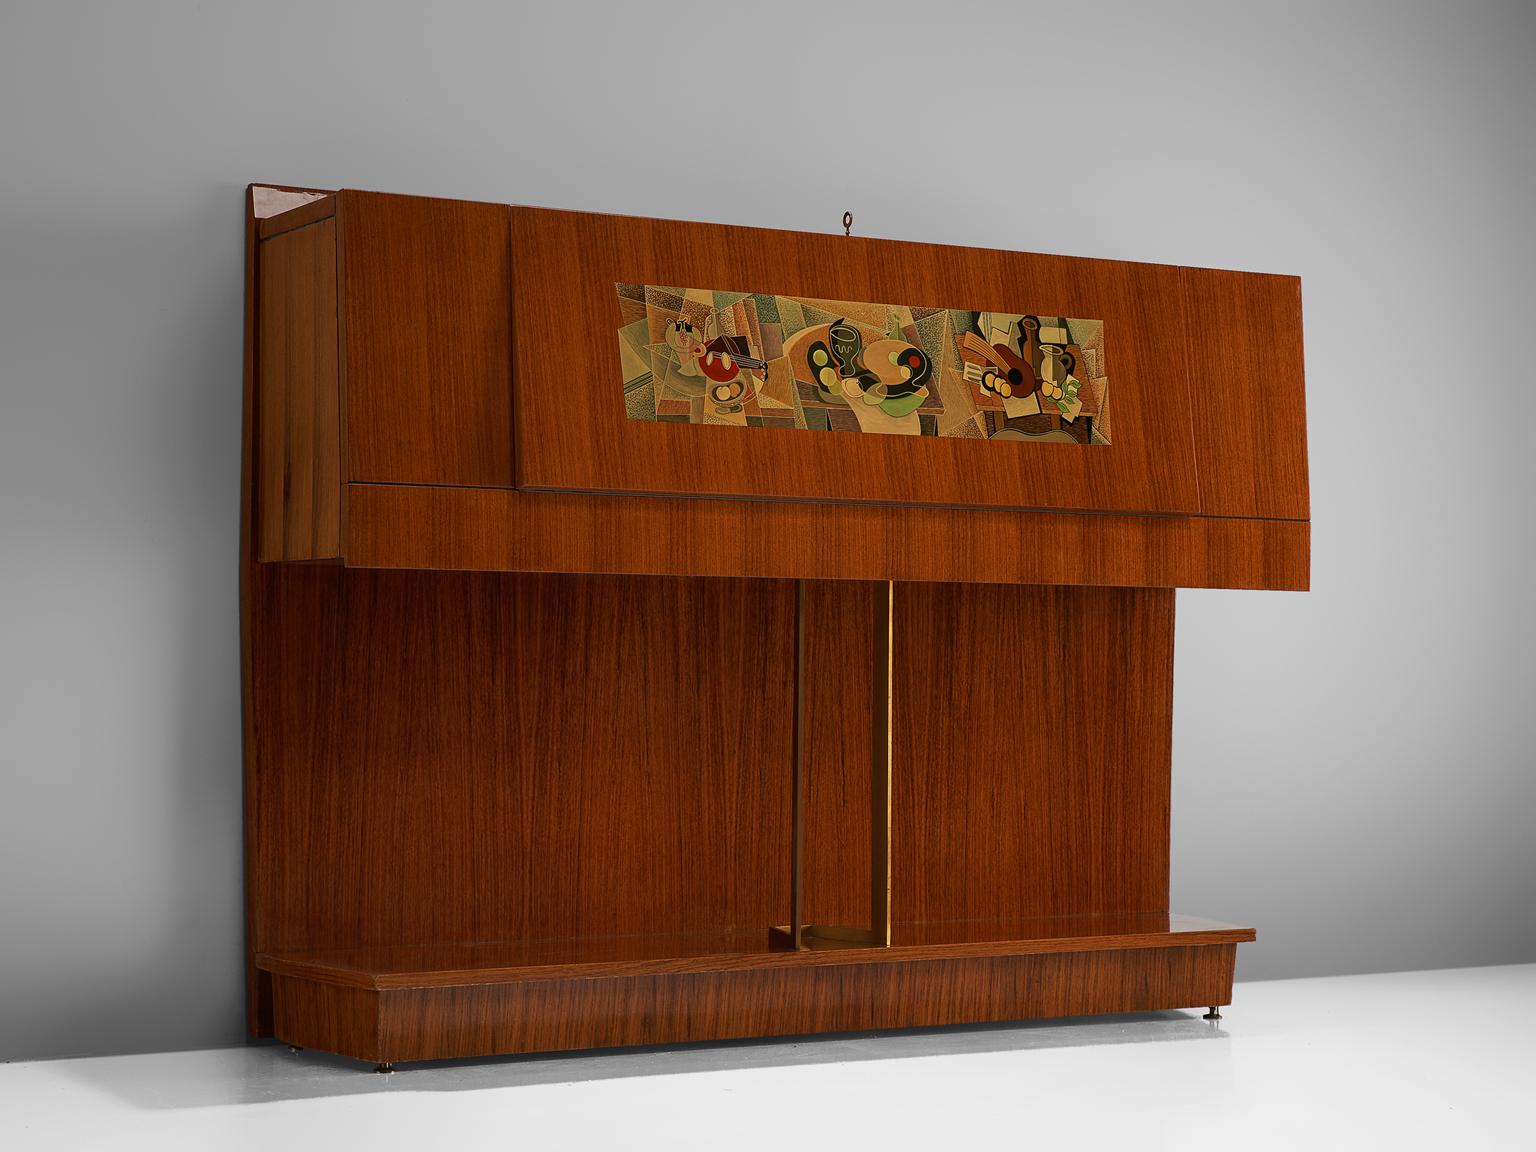 Vittorio Dassi & Gino Severini, dry bar in walnut, birch and glass, Italy 1950s.

Italian buffet with beautiful decorative painting on the front by Gino Severini. This bar has an interesting design which reminds a bit of a piano. The storage part is